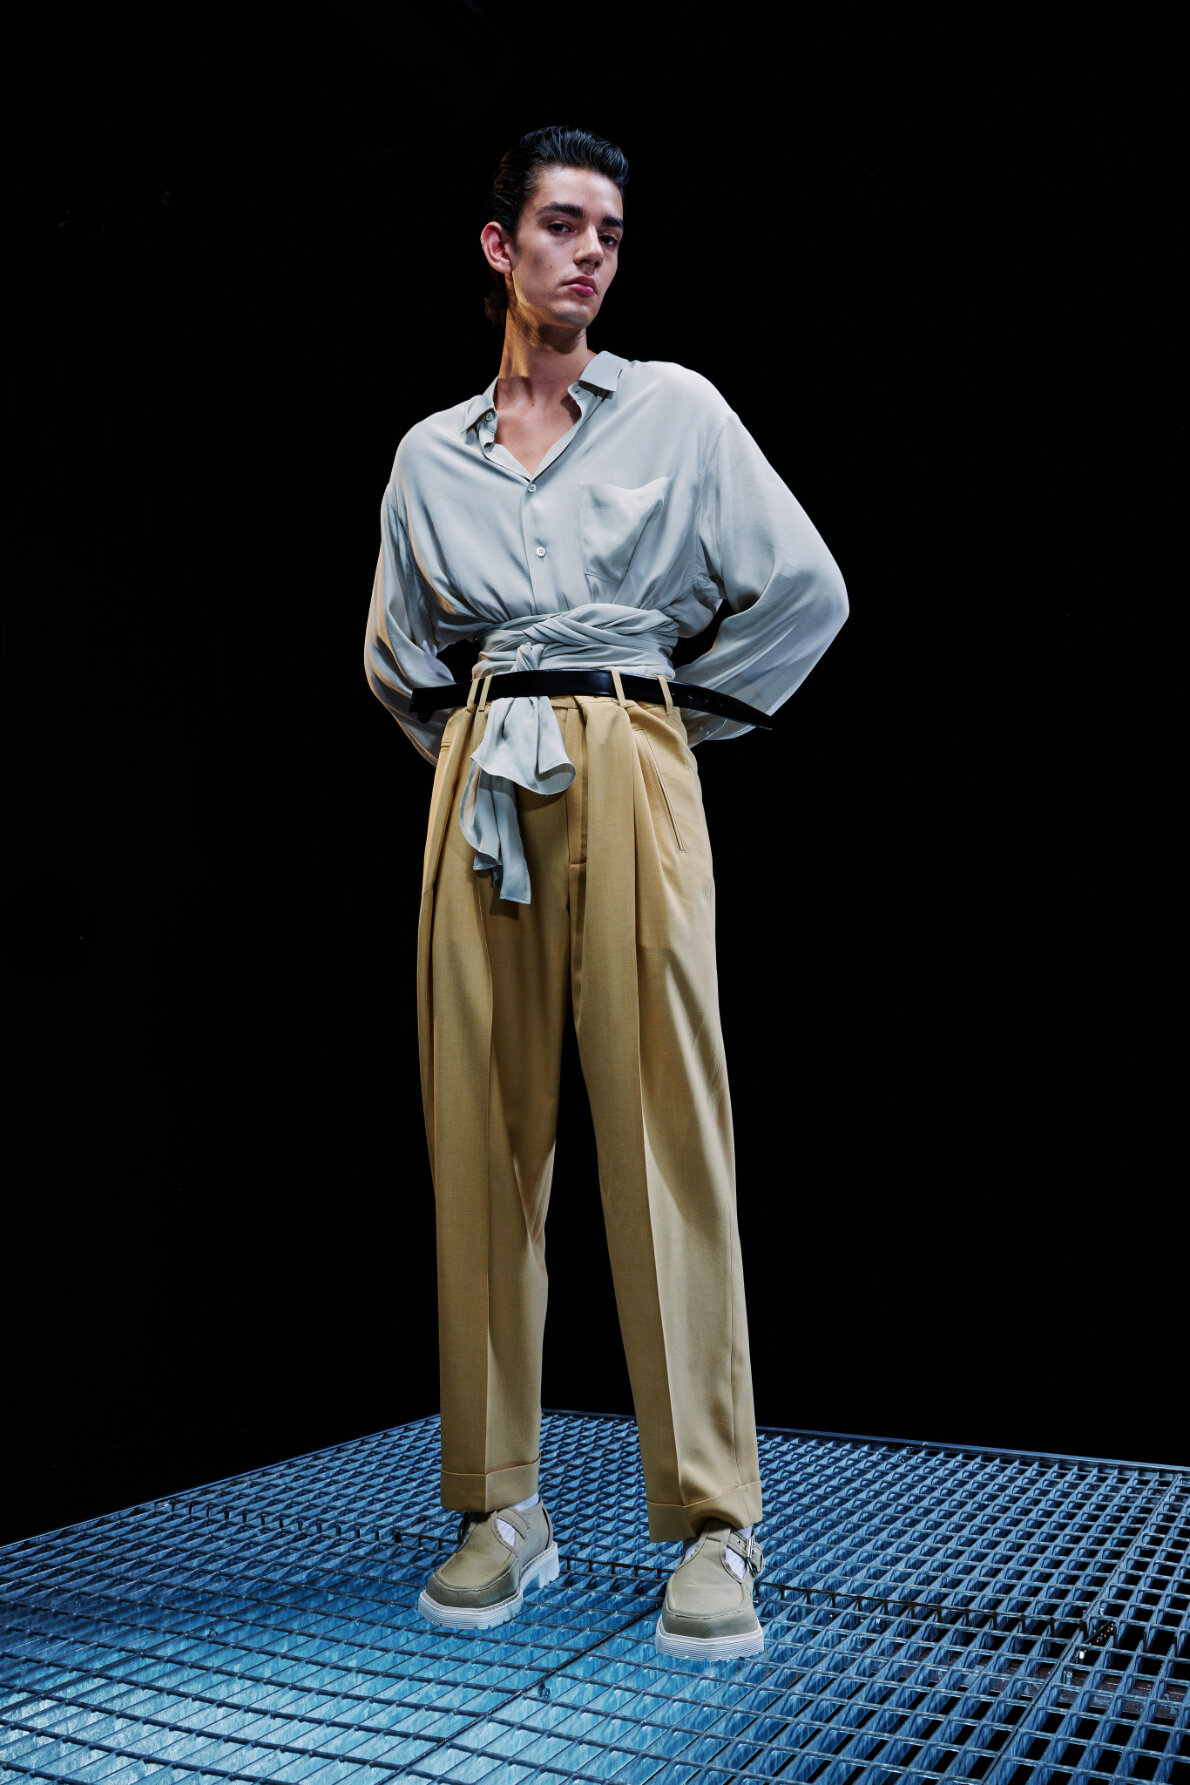  Model wears light blue shirt and tan trousers for Magliano's Spring/Summer 2022 collection for Milan Fashion Week. 